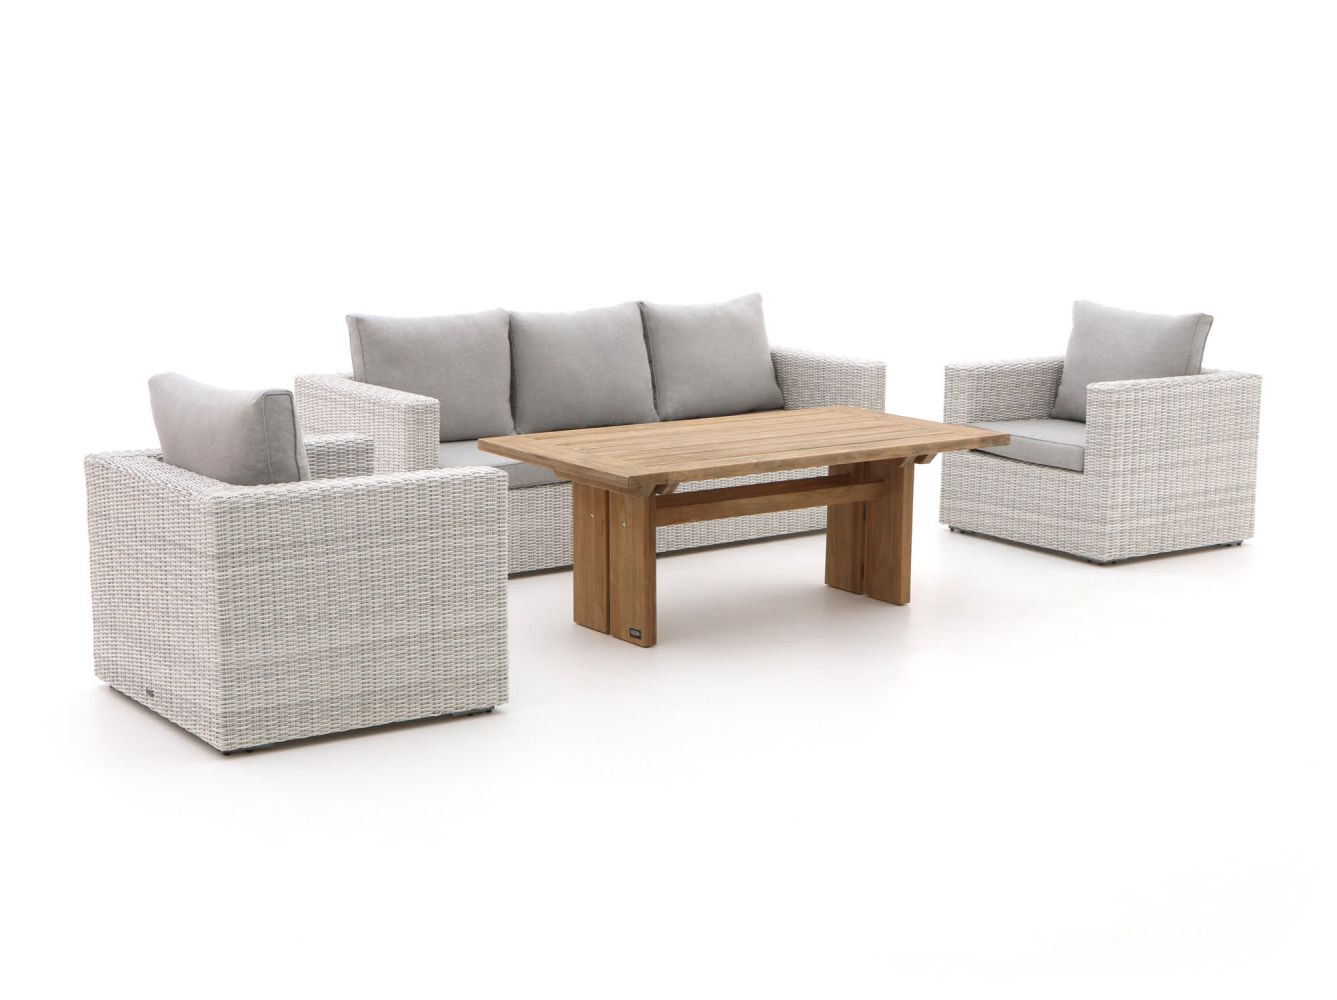 e5cf34aa1a83ef115a8120c8e7386a08397252e5 118123 p01 bayudqbqp3tf19cf - Intenso Carpino/ROUGH-L dining loungeset 4-delig